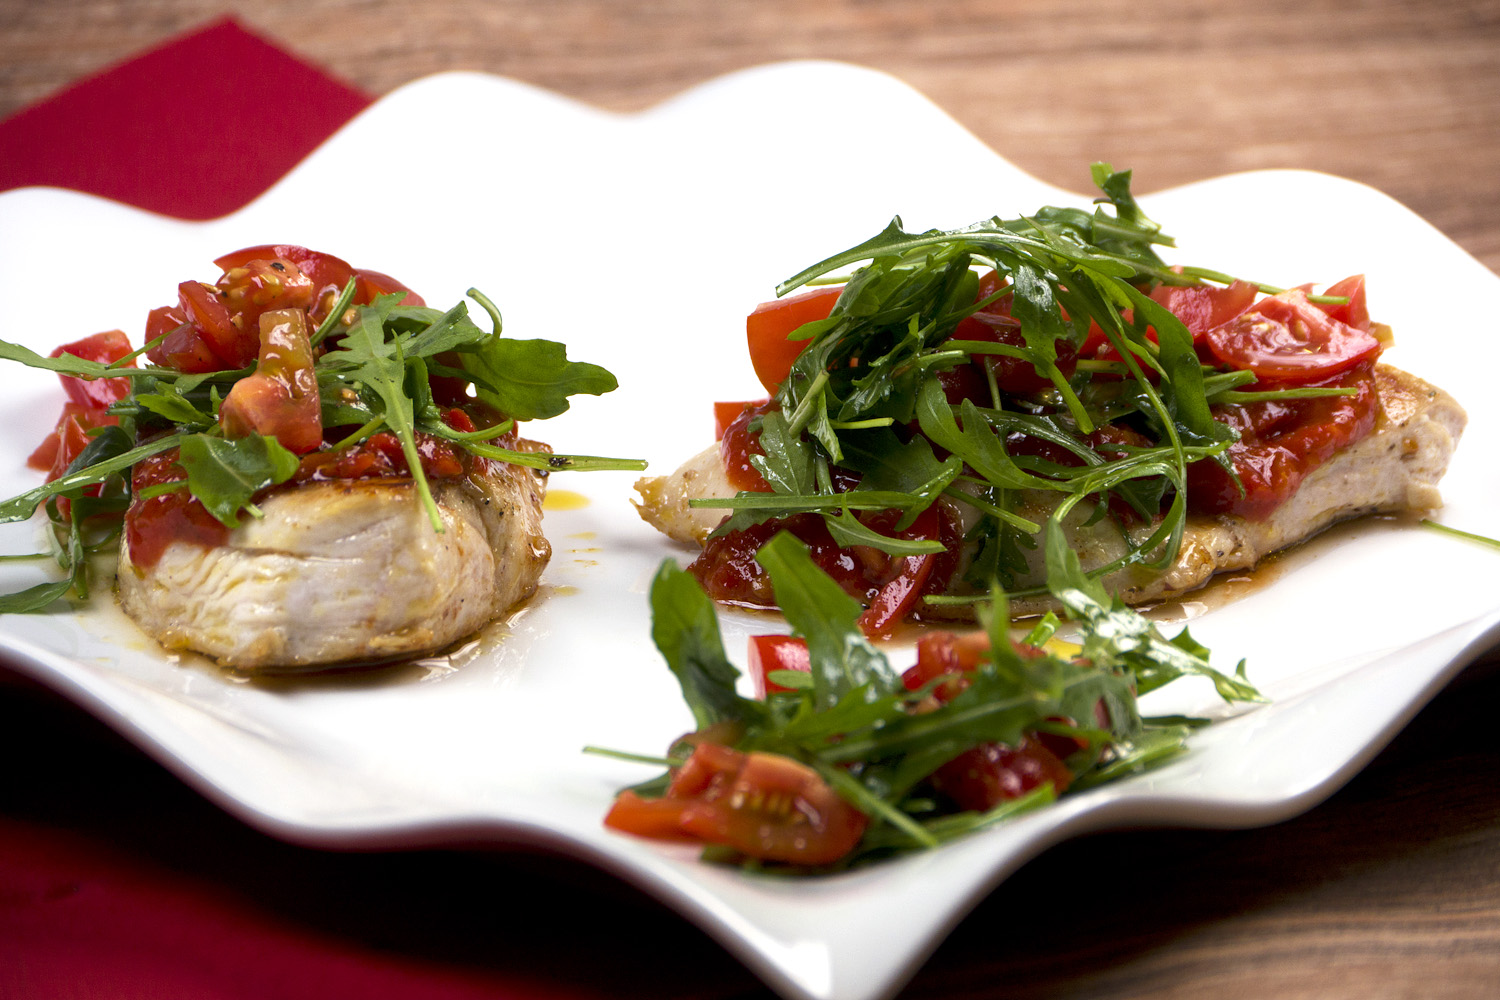  Savory Low Carb Chicken Breast Fillet with Ajvar, Ruccola and Tomatoes 